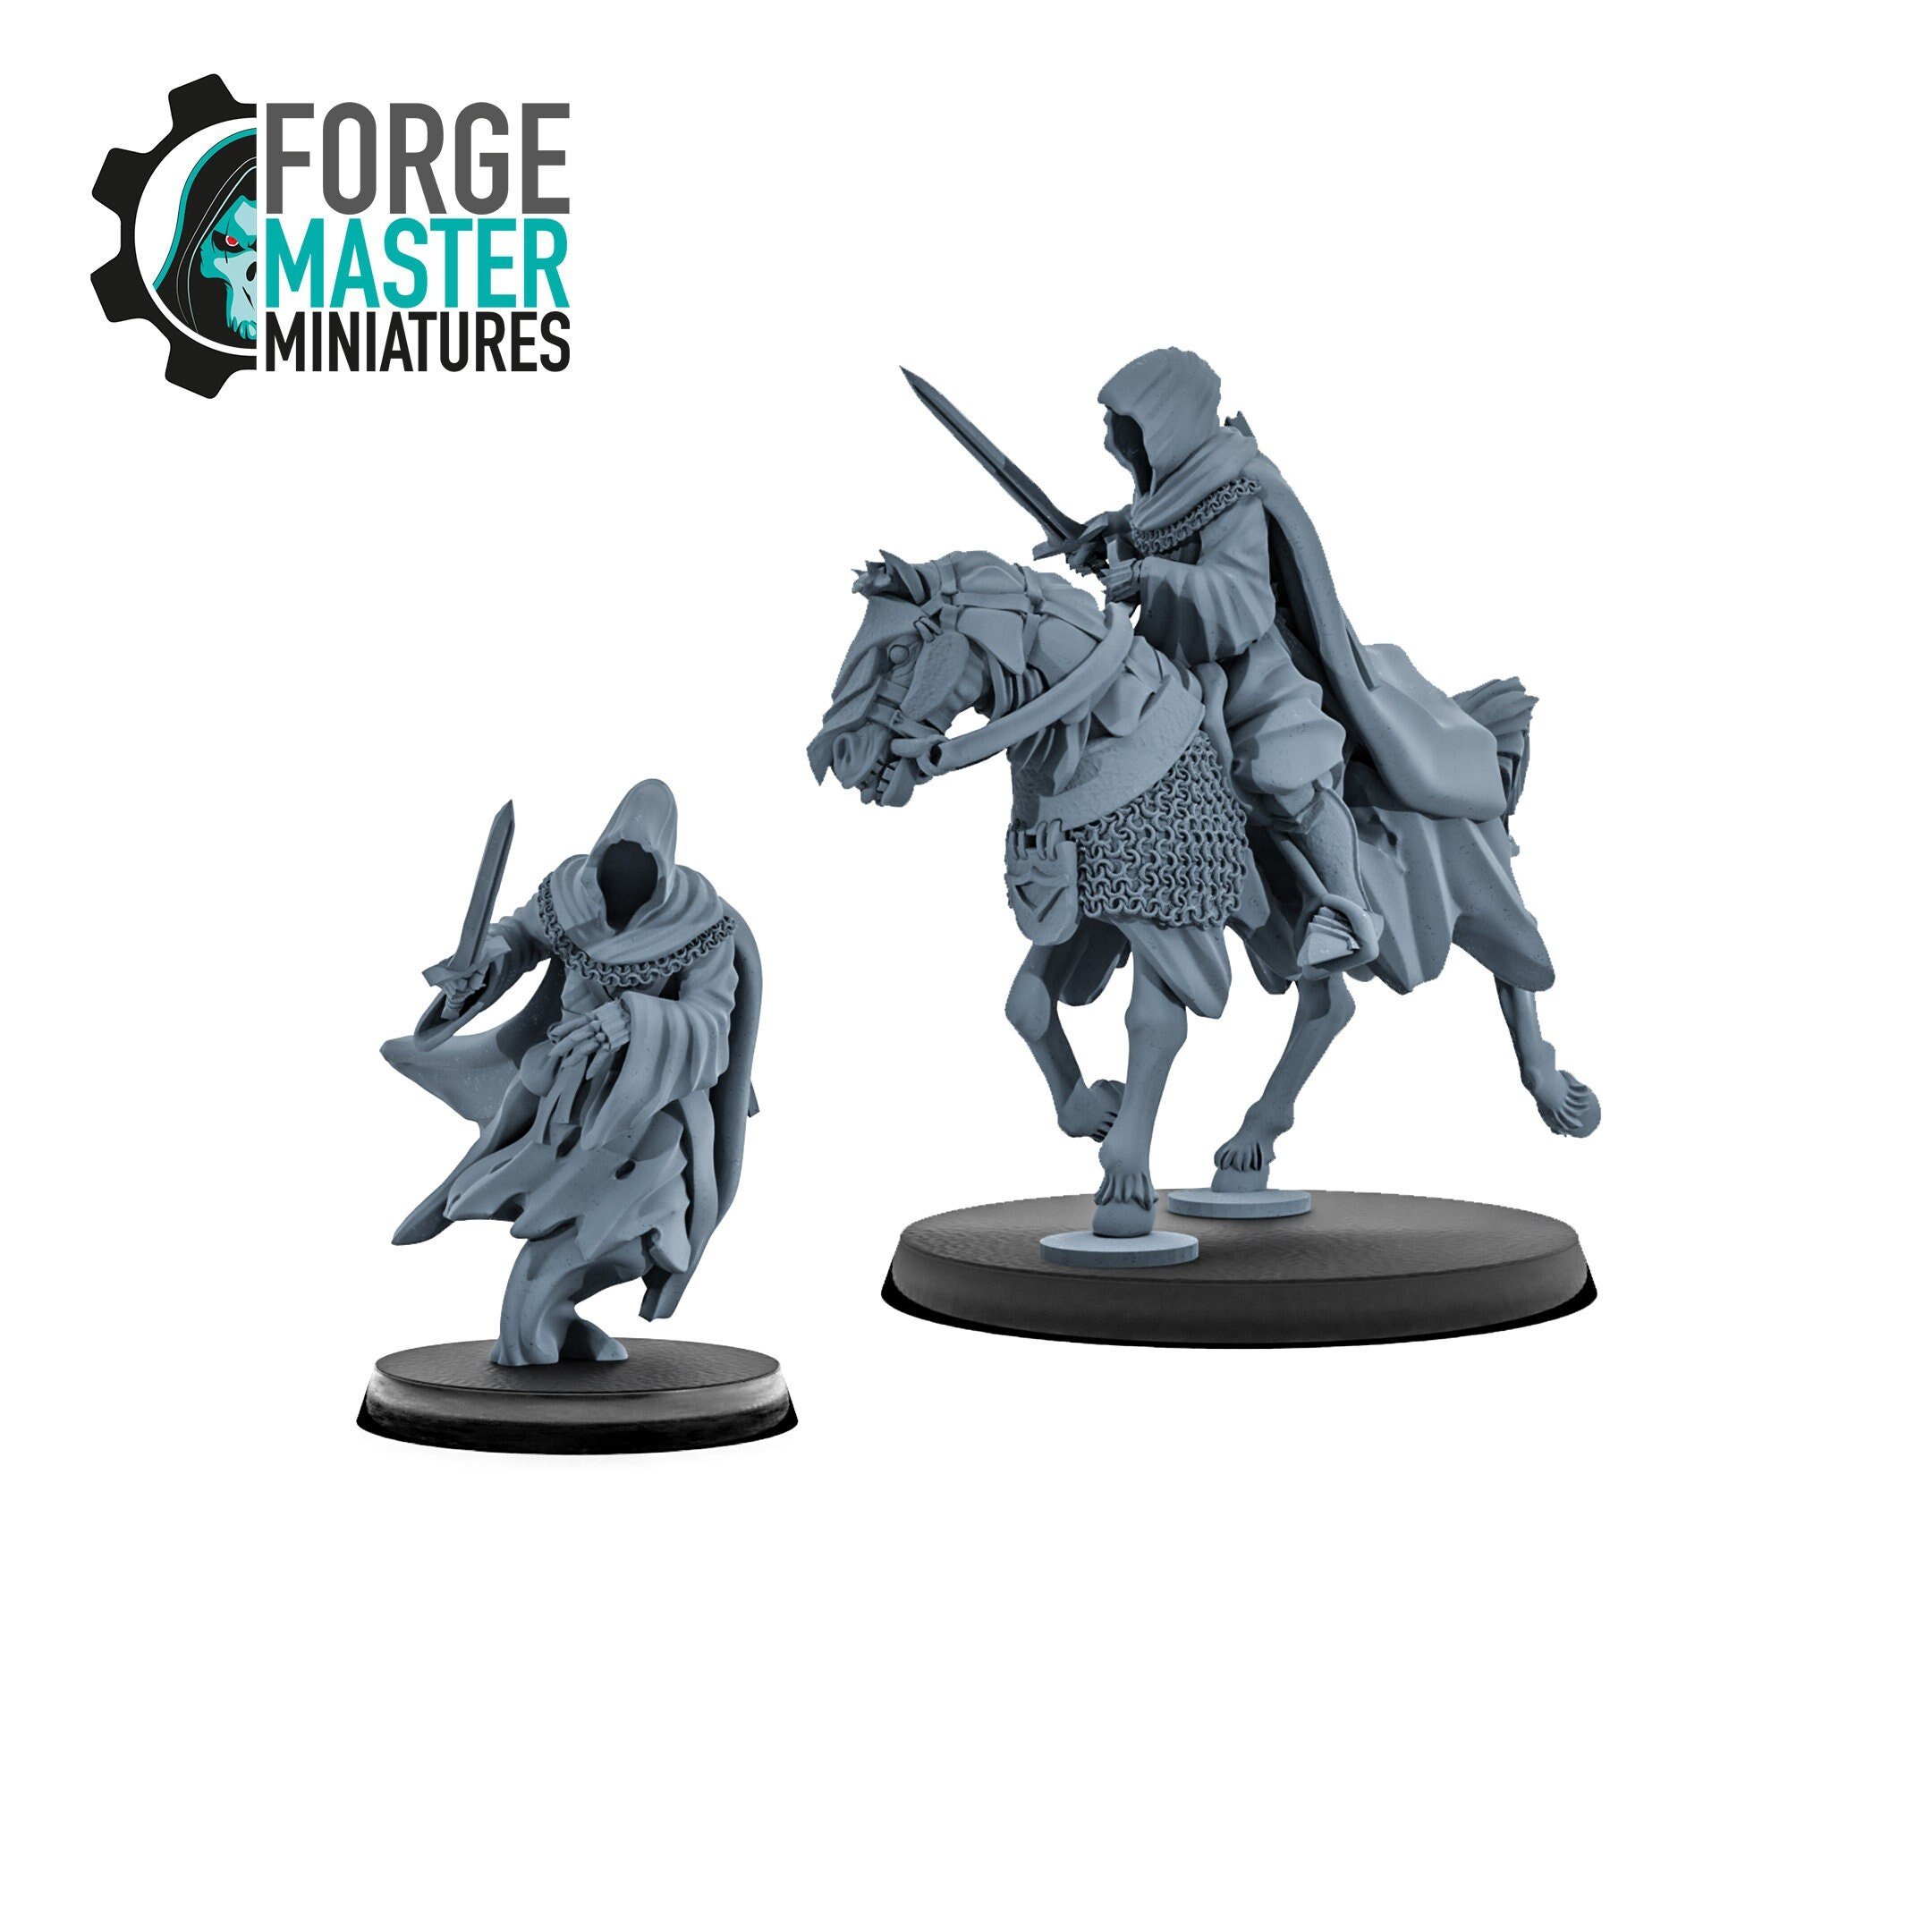 Lord of the Shadows Wraith wargaming miniatures by Kzk Minis 3D Printed by Forgemaster Miniatures